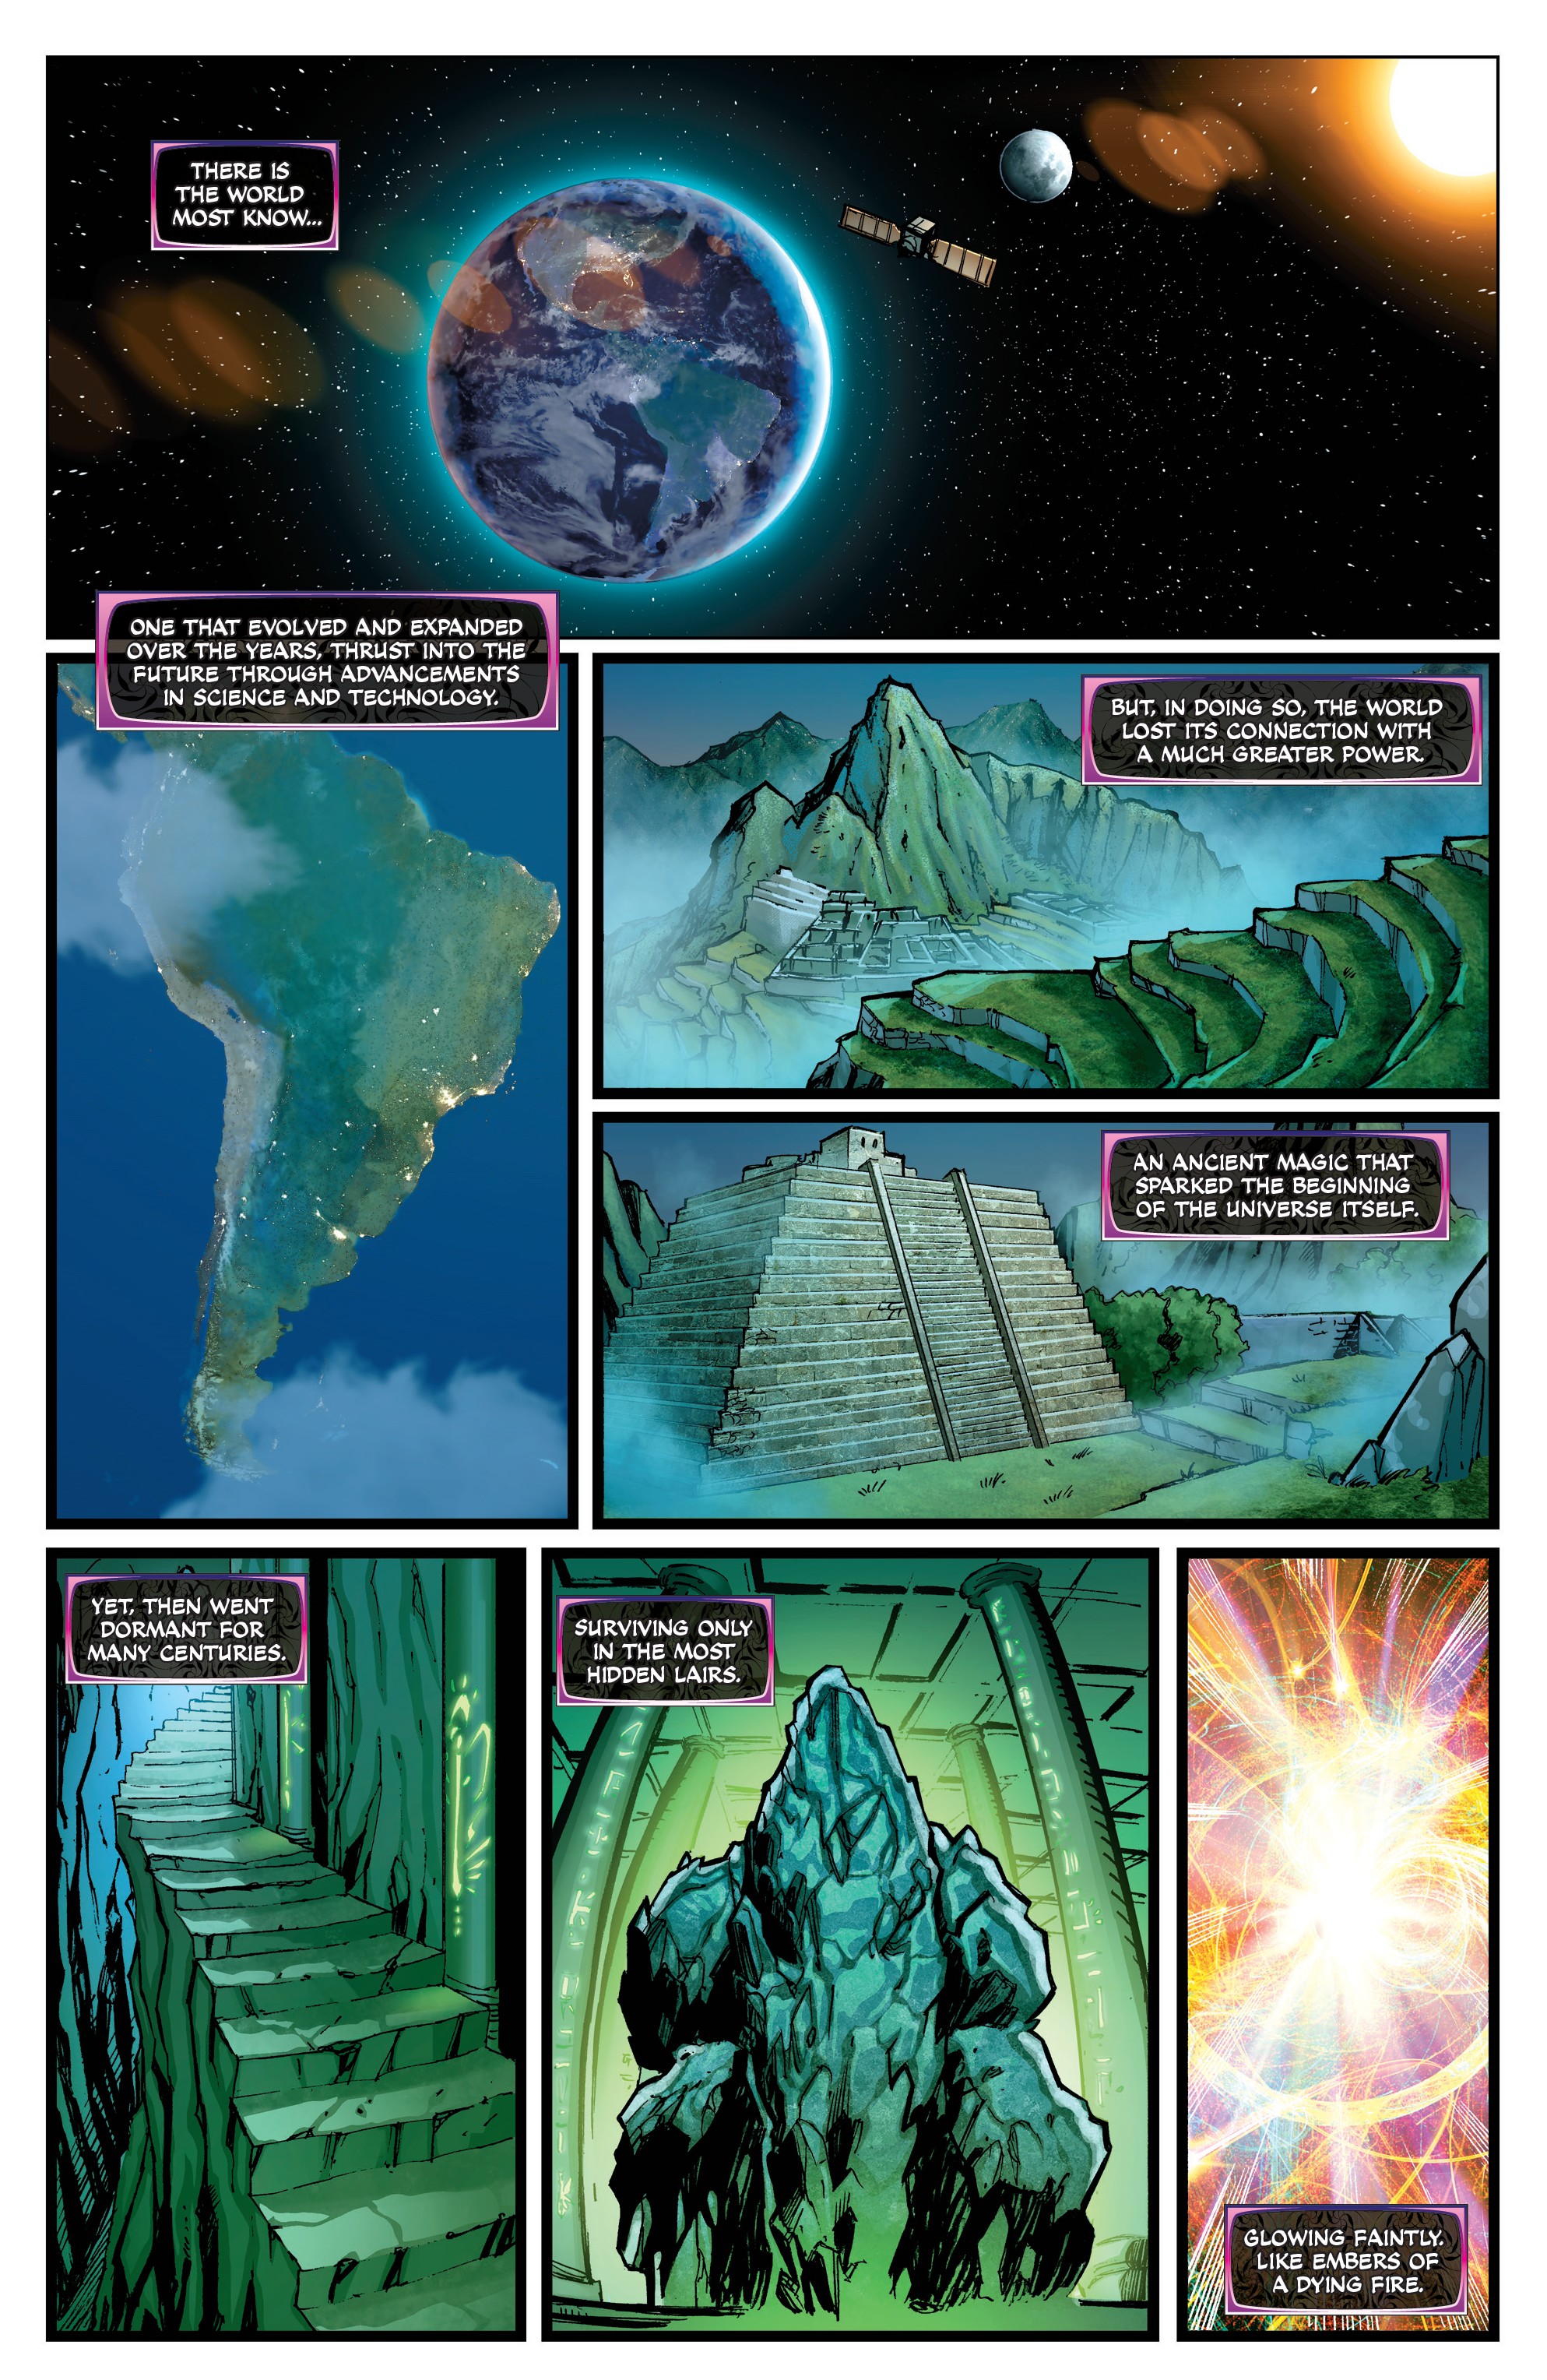 Soulfire Vol. 7 (2018-): Chapter 2 - Page 4